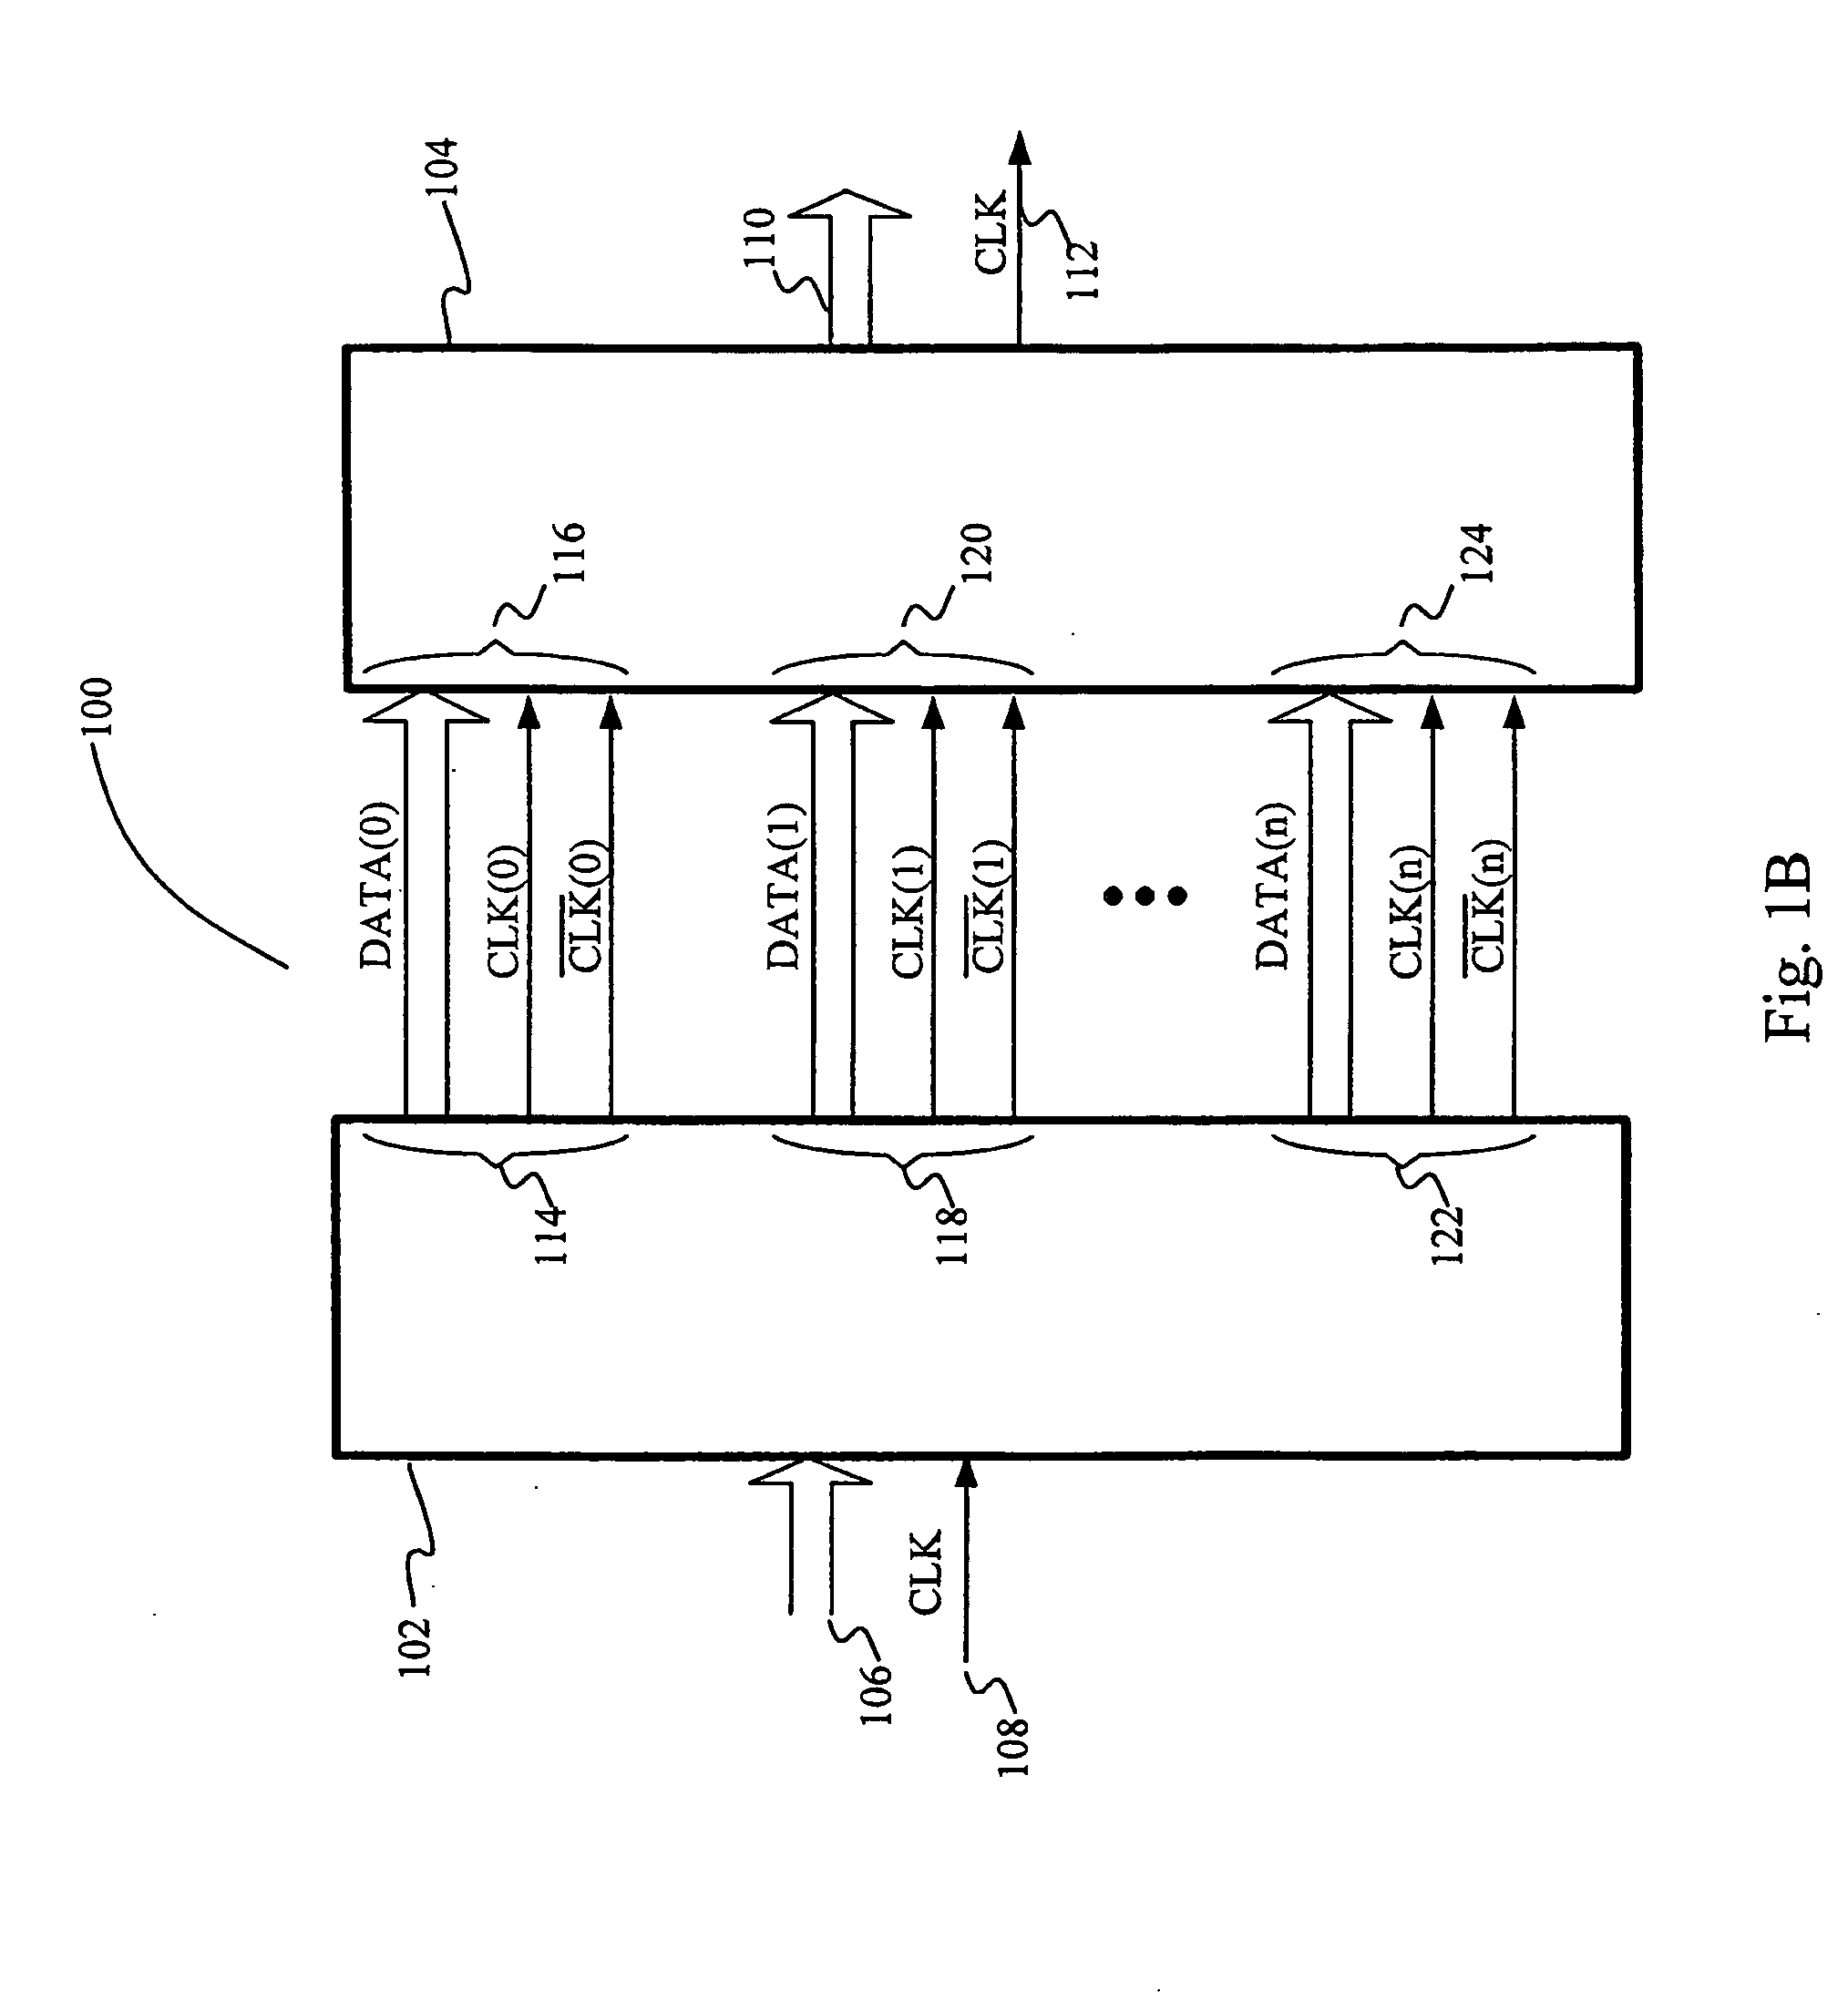 Alignment mode selection mechanism for elastic interface